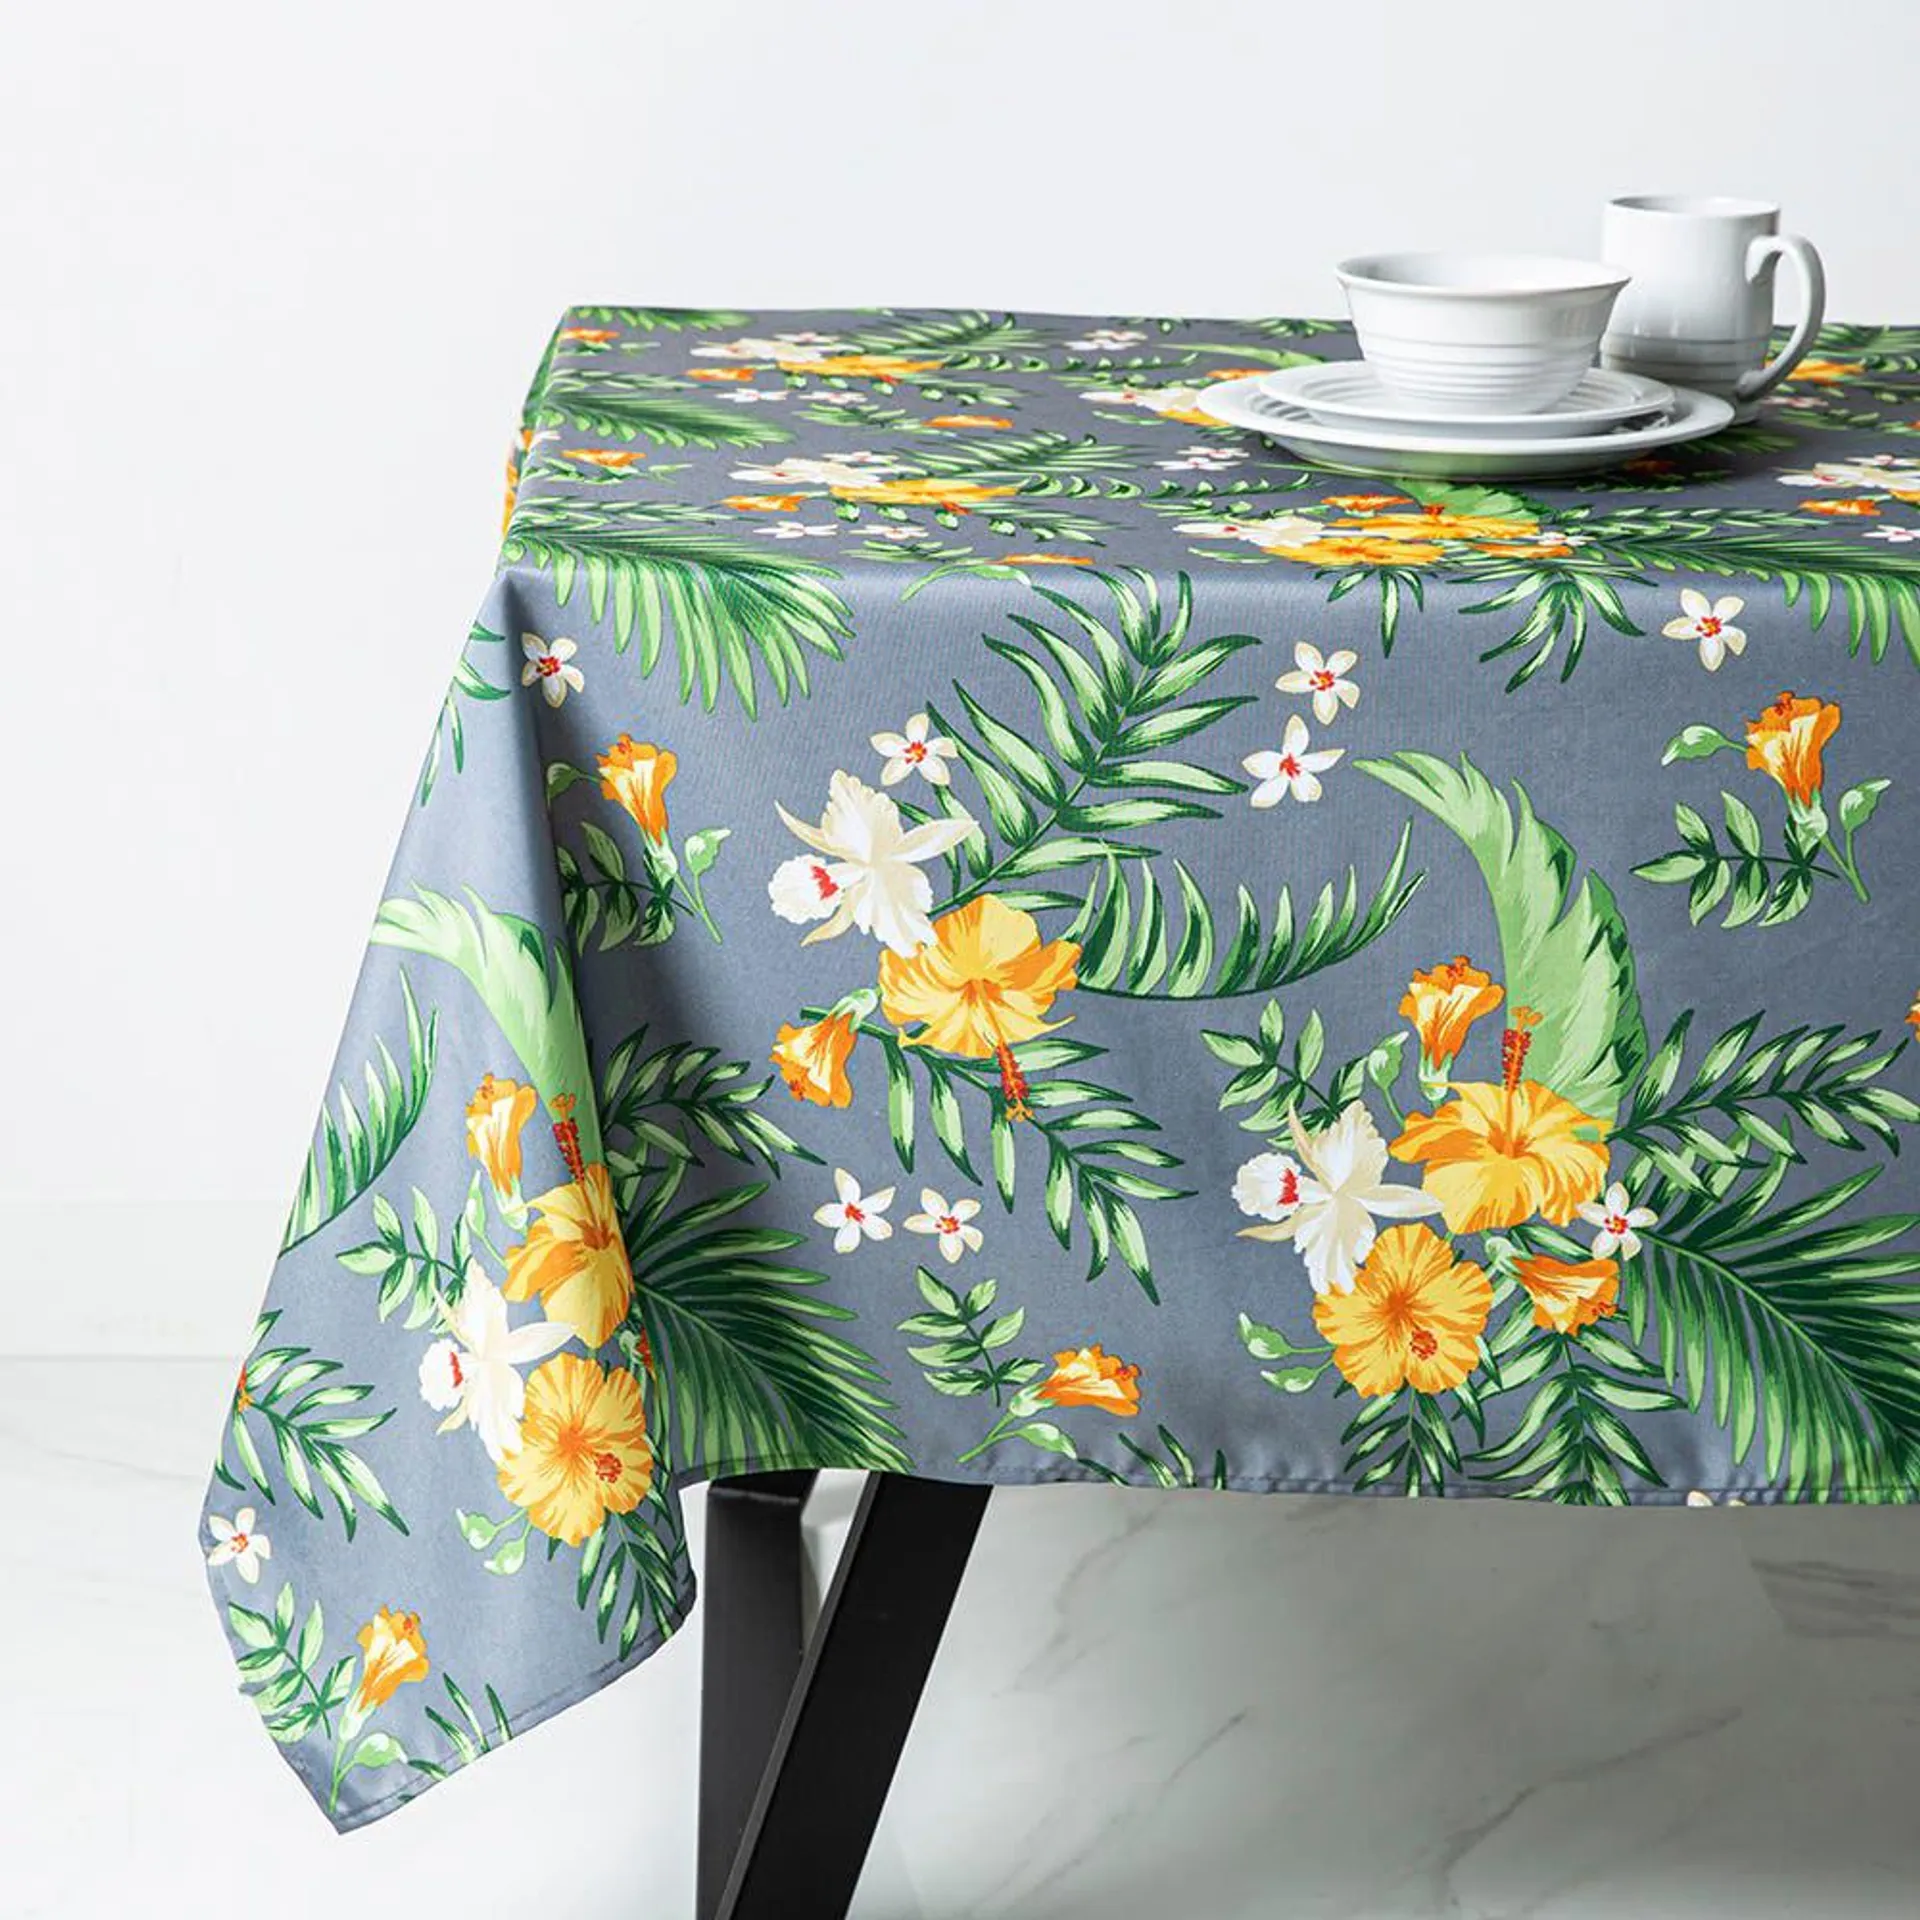 Texstyles Printed 'Tropical' Polyester Tablecloth 58"x78" (Grey)